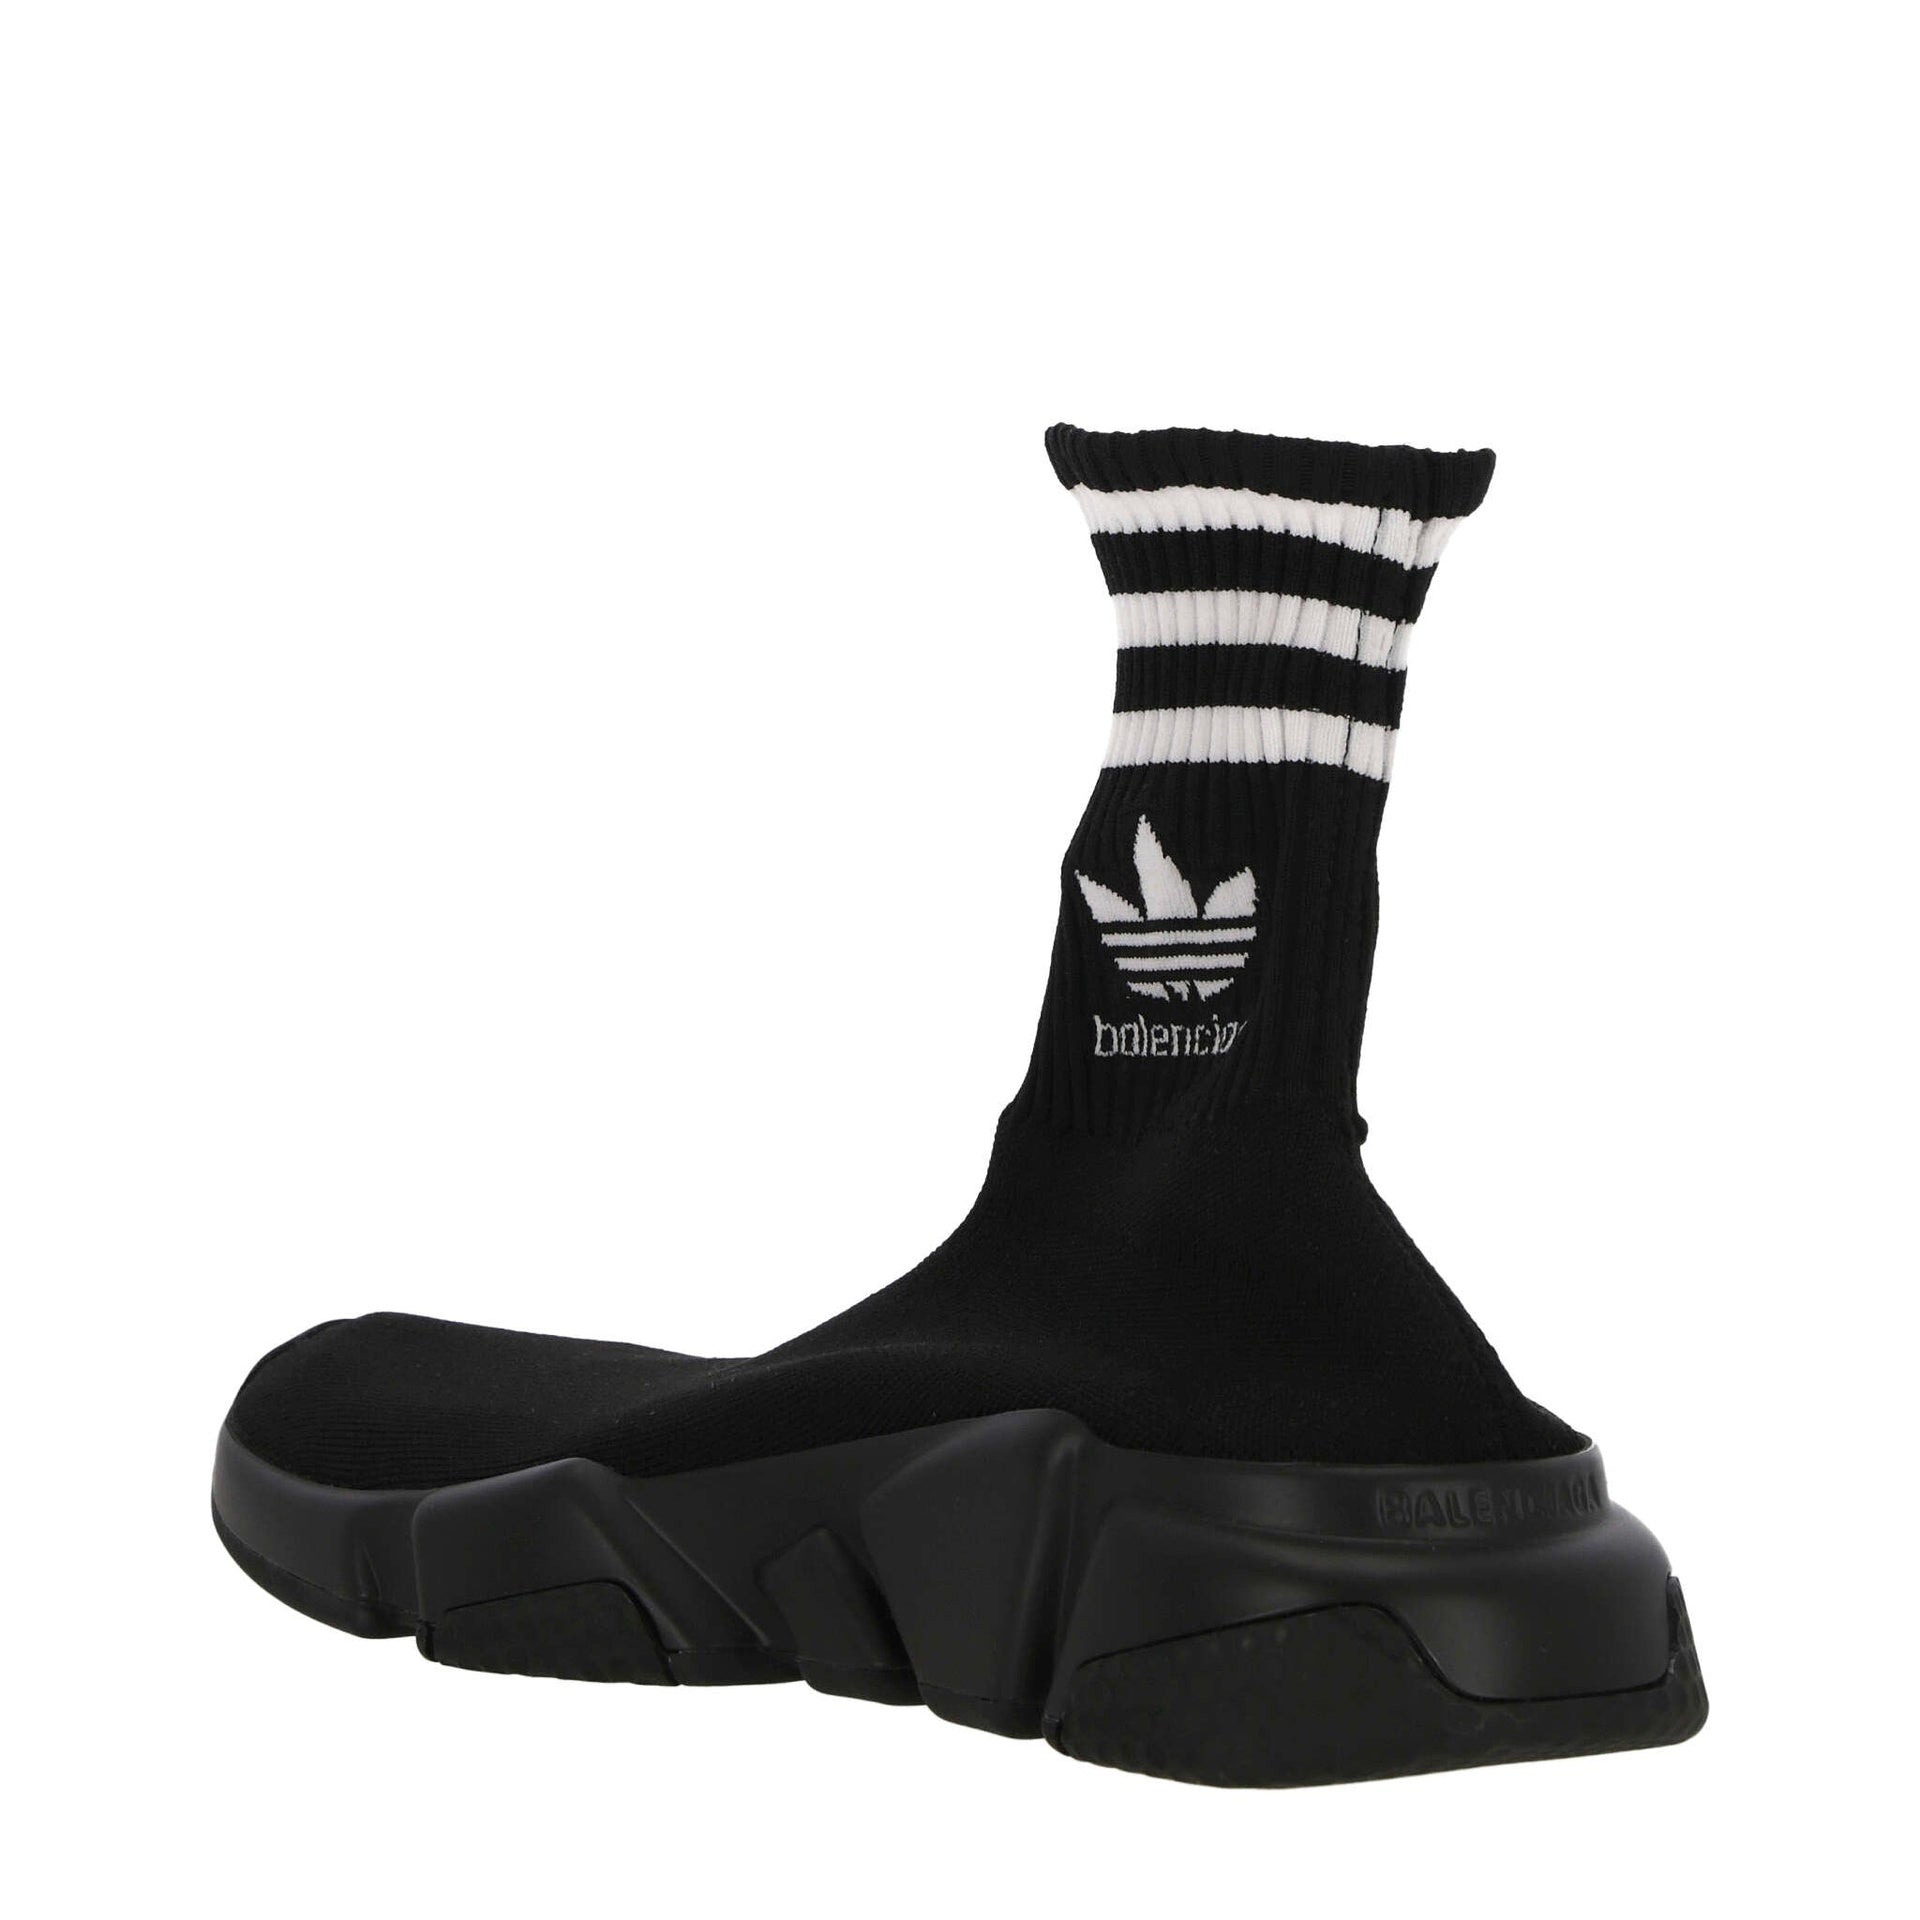 BALENCIAGA-X-ADIDAS-OUTLET-SALE-Balenciaga-X-Adidas-Speed-2_0-Lt-Sock-Sneakers-Sneakers-ARCHIVE-COLLECTION-3_0be5aa19-a002-4e95-9b9f-be14692dabe3.jpg